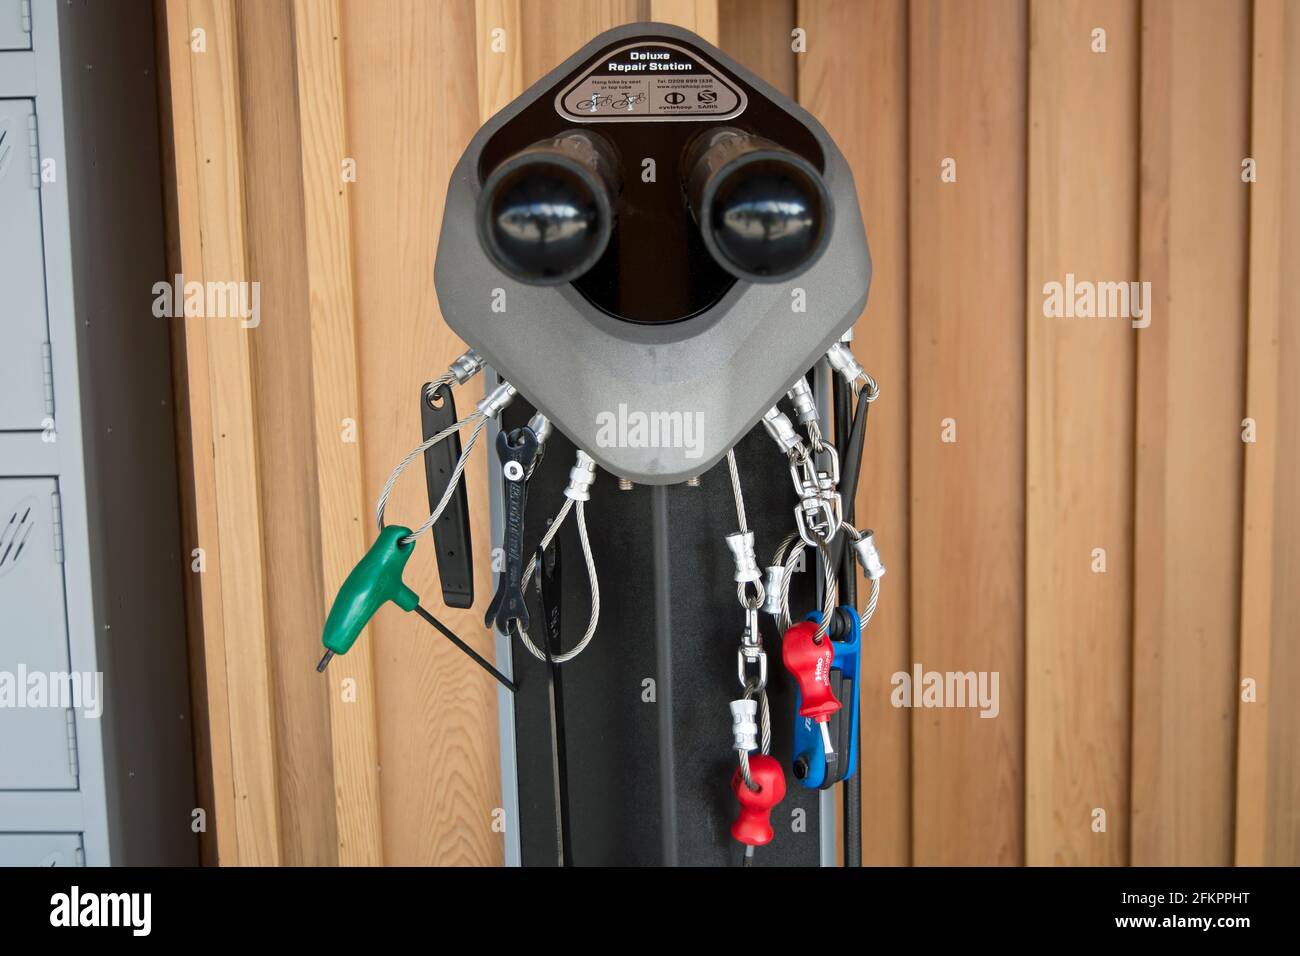 bike repair stand, or repair station, with attached tools at the cycle hub of kingston railway station, surrey, england Stock Photo